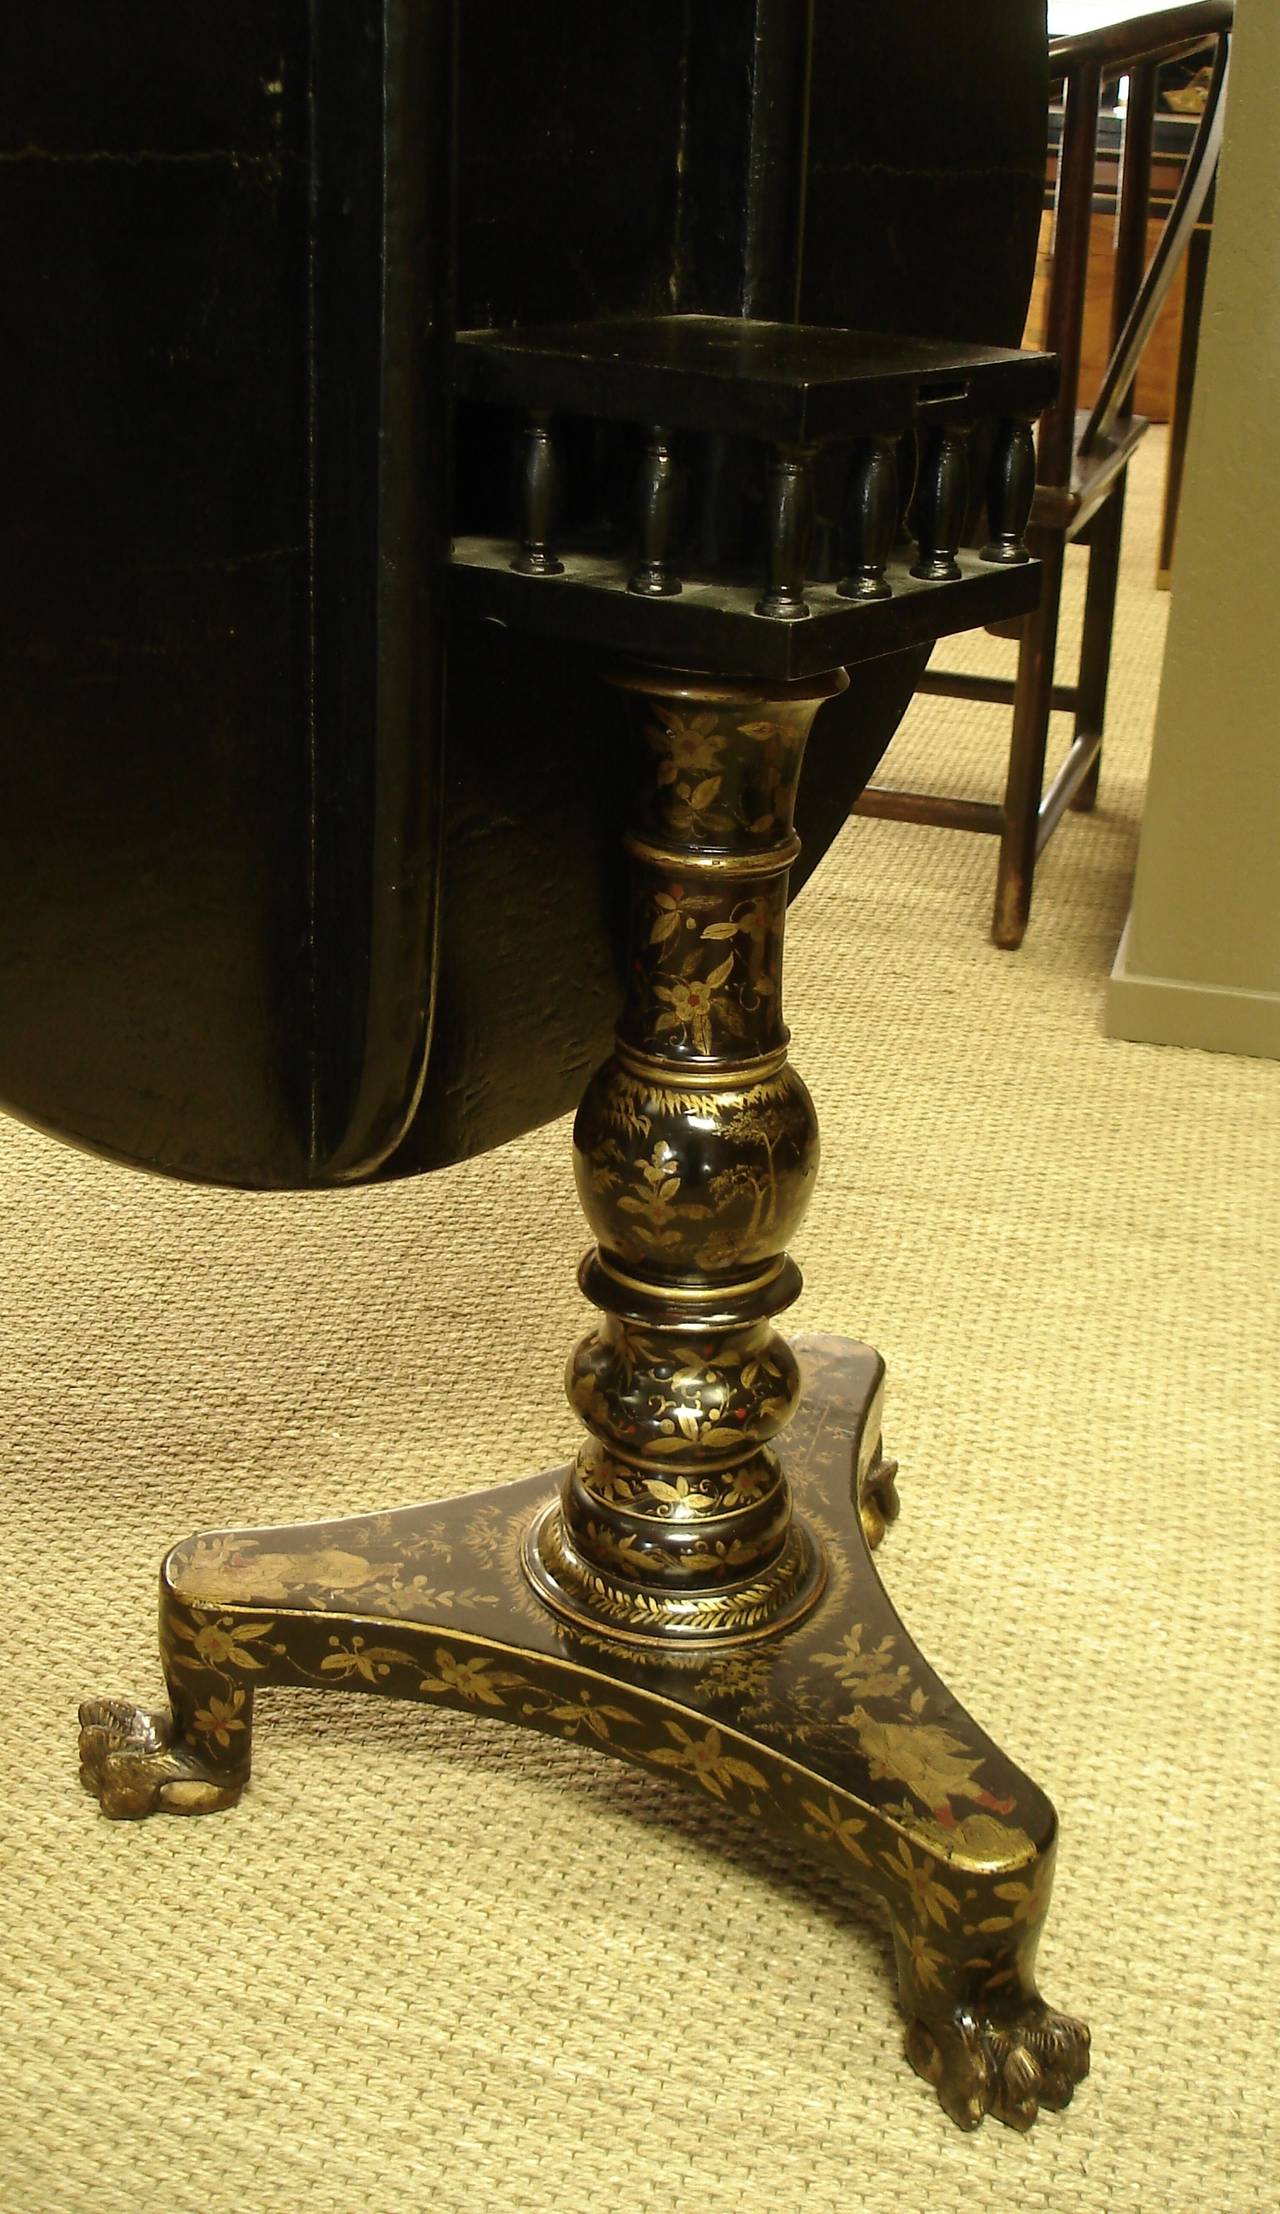 19th Century Chinese Export Lacquer Tilt-Top Table